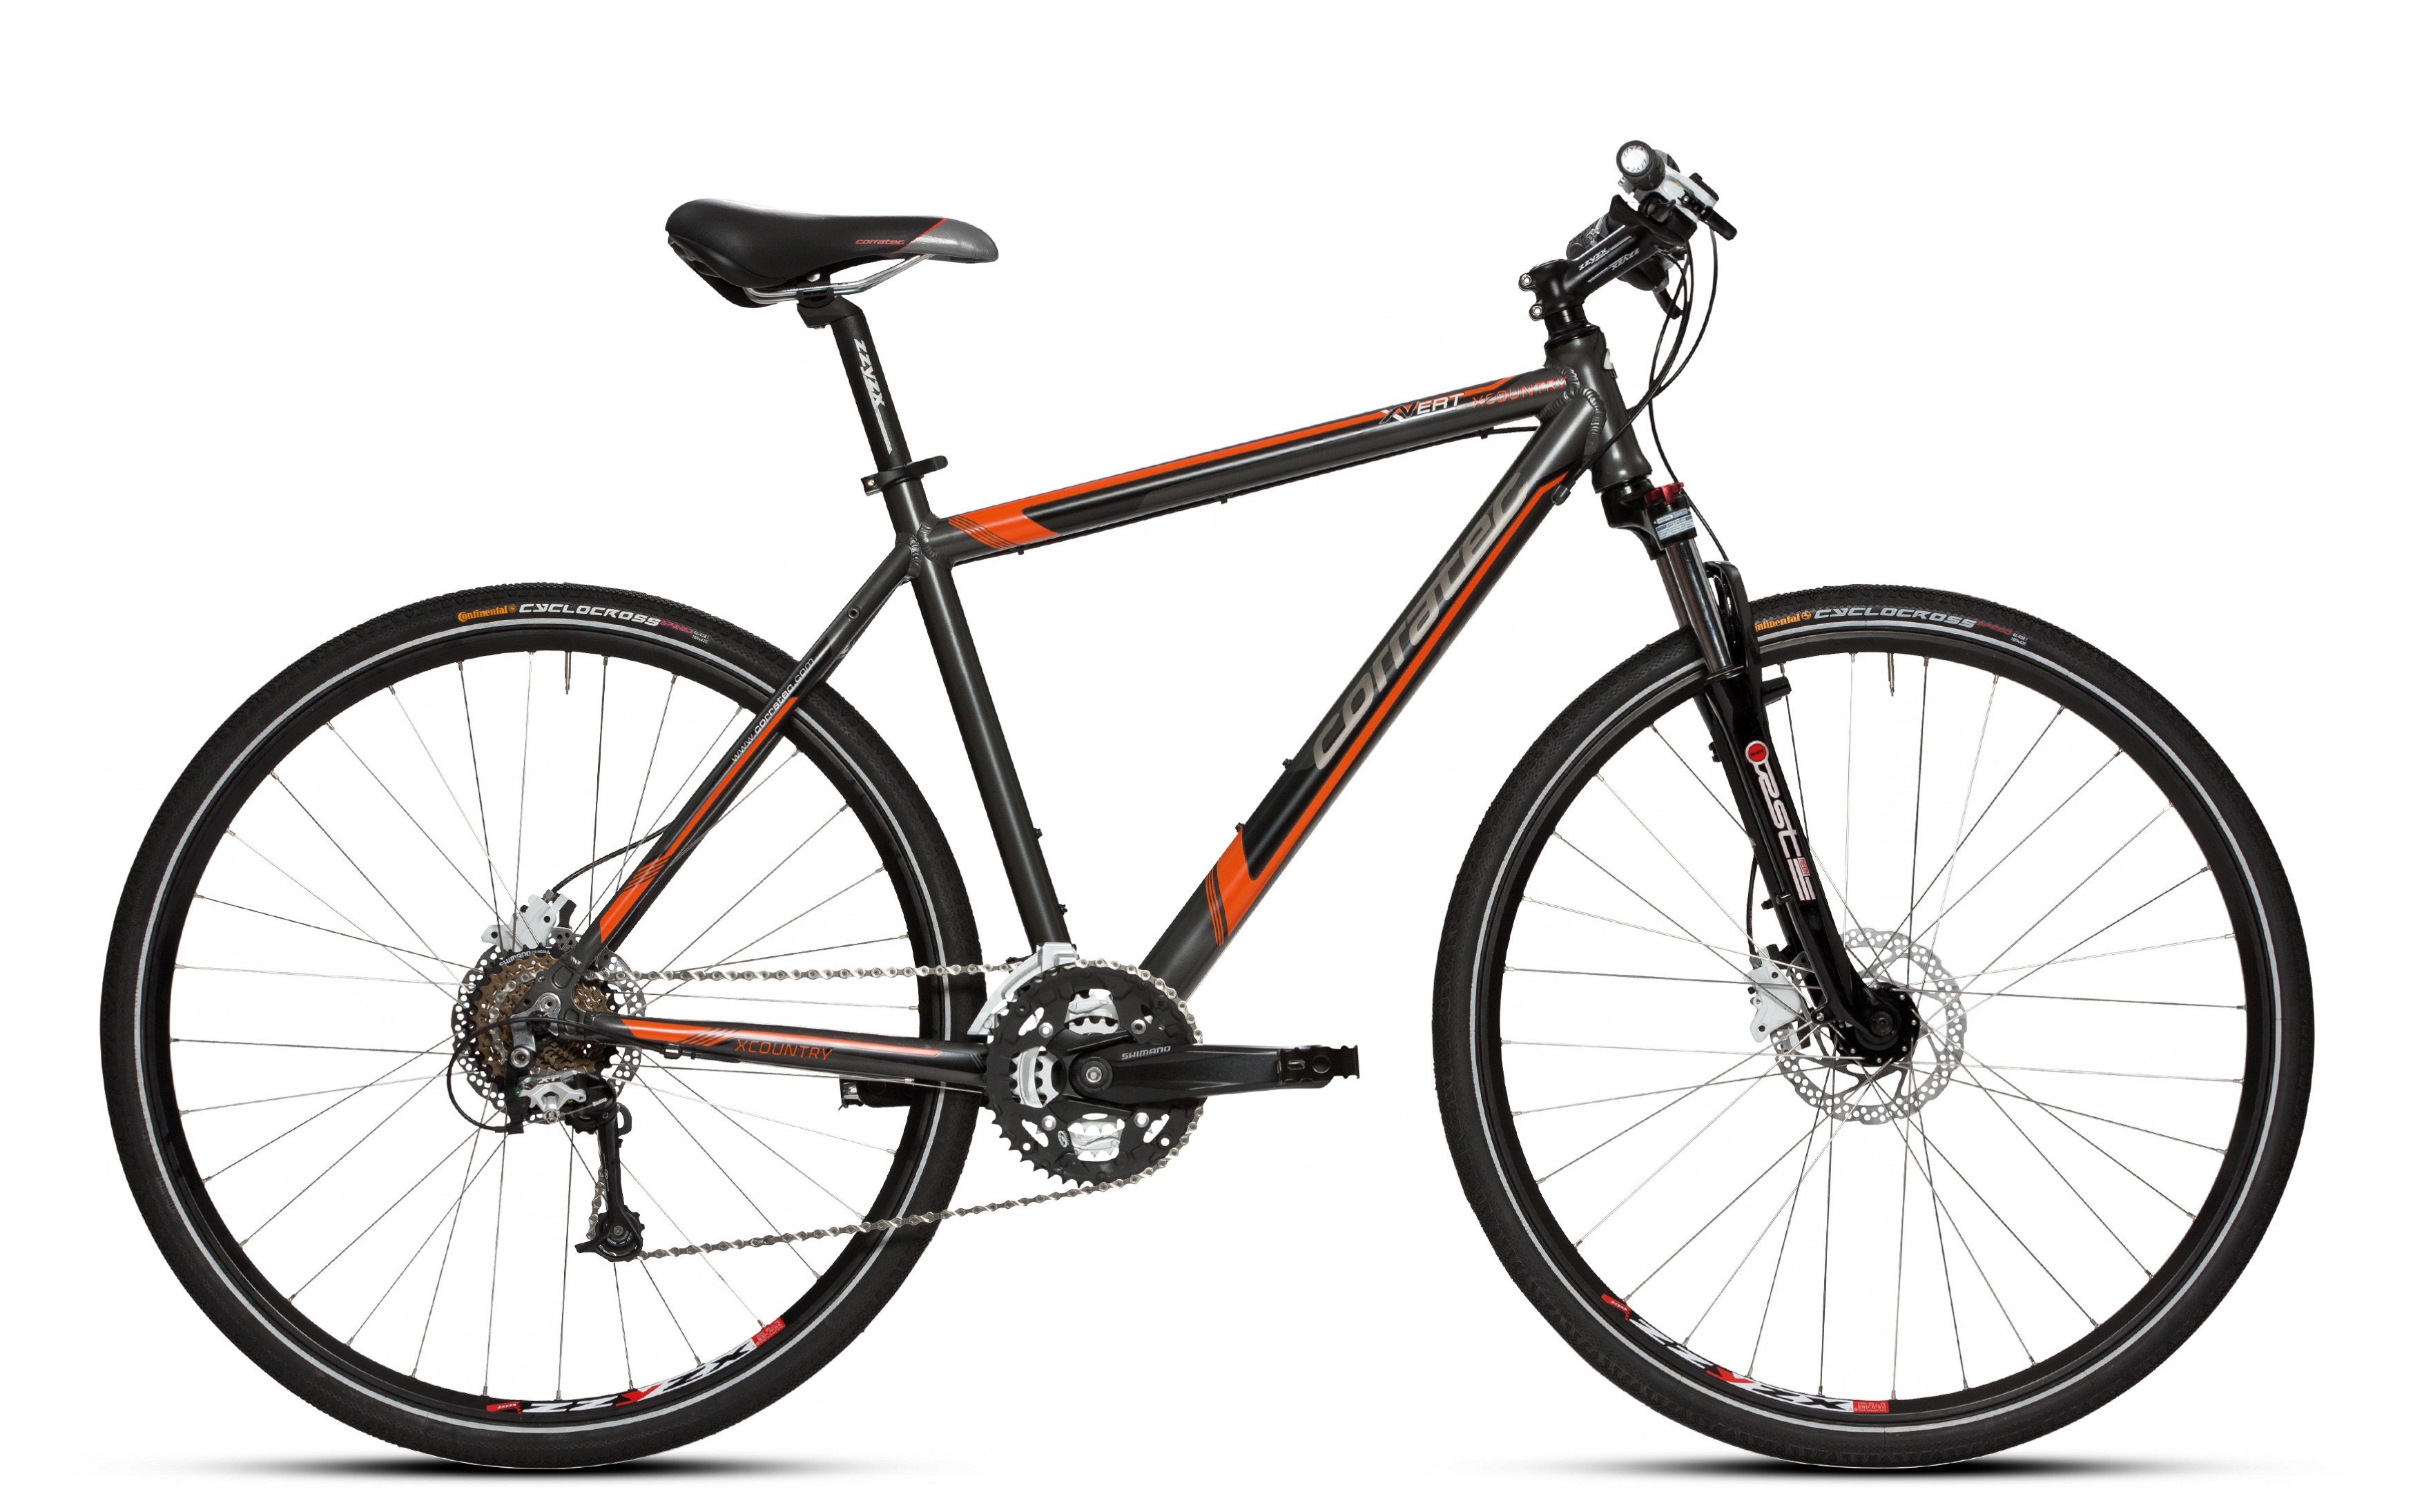 Bicycles PNG images 